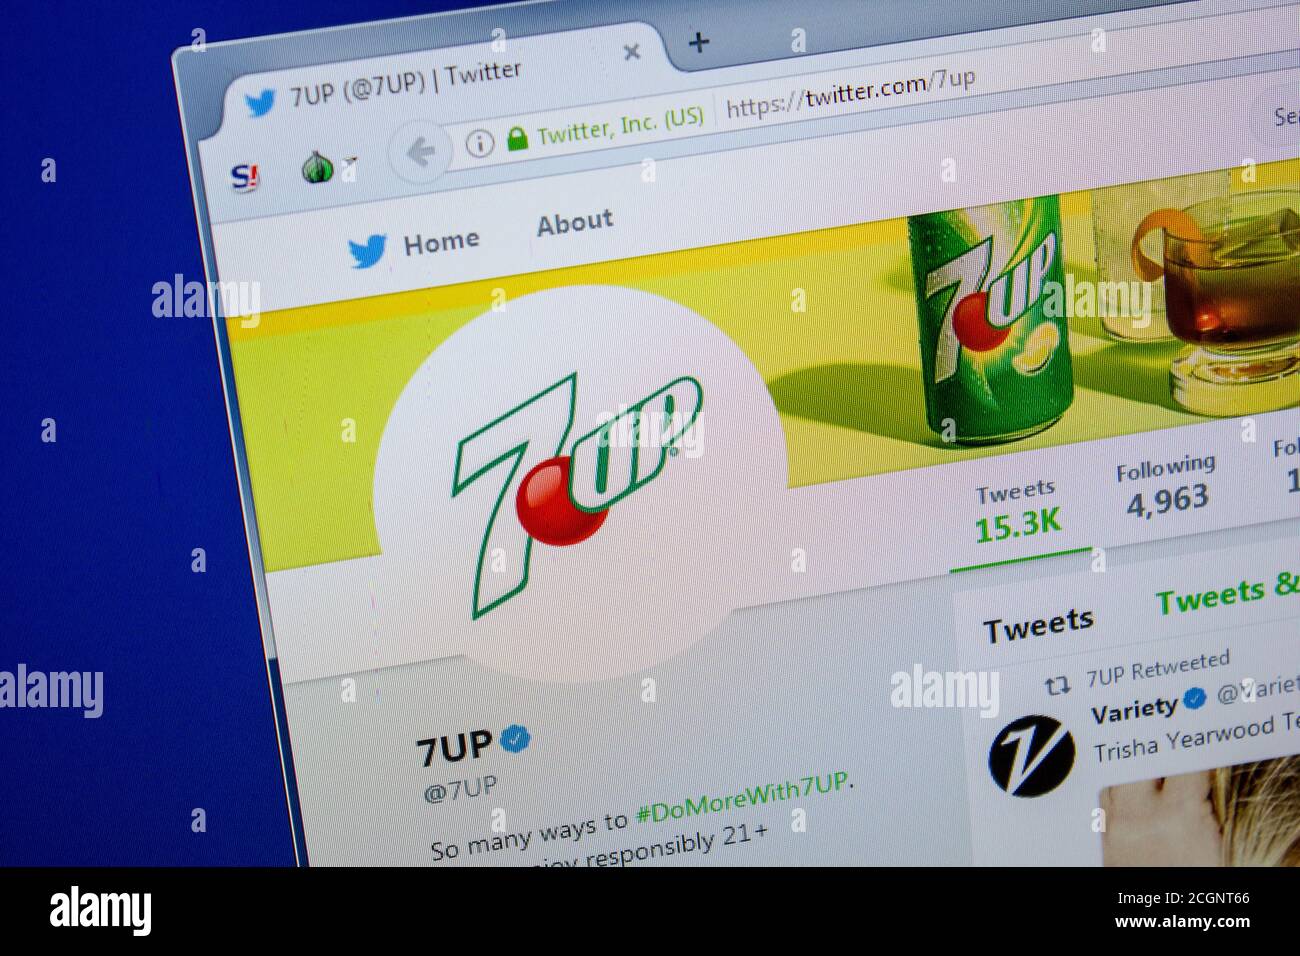 Ryazan, Russia - July 11, 2018: Twitter of 7UP website on the display of PC Stock Photo